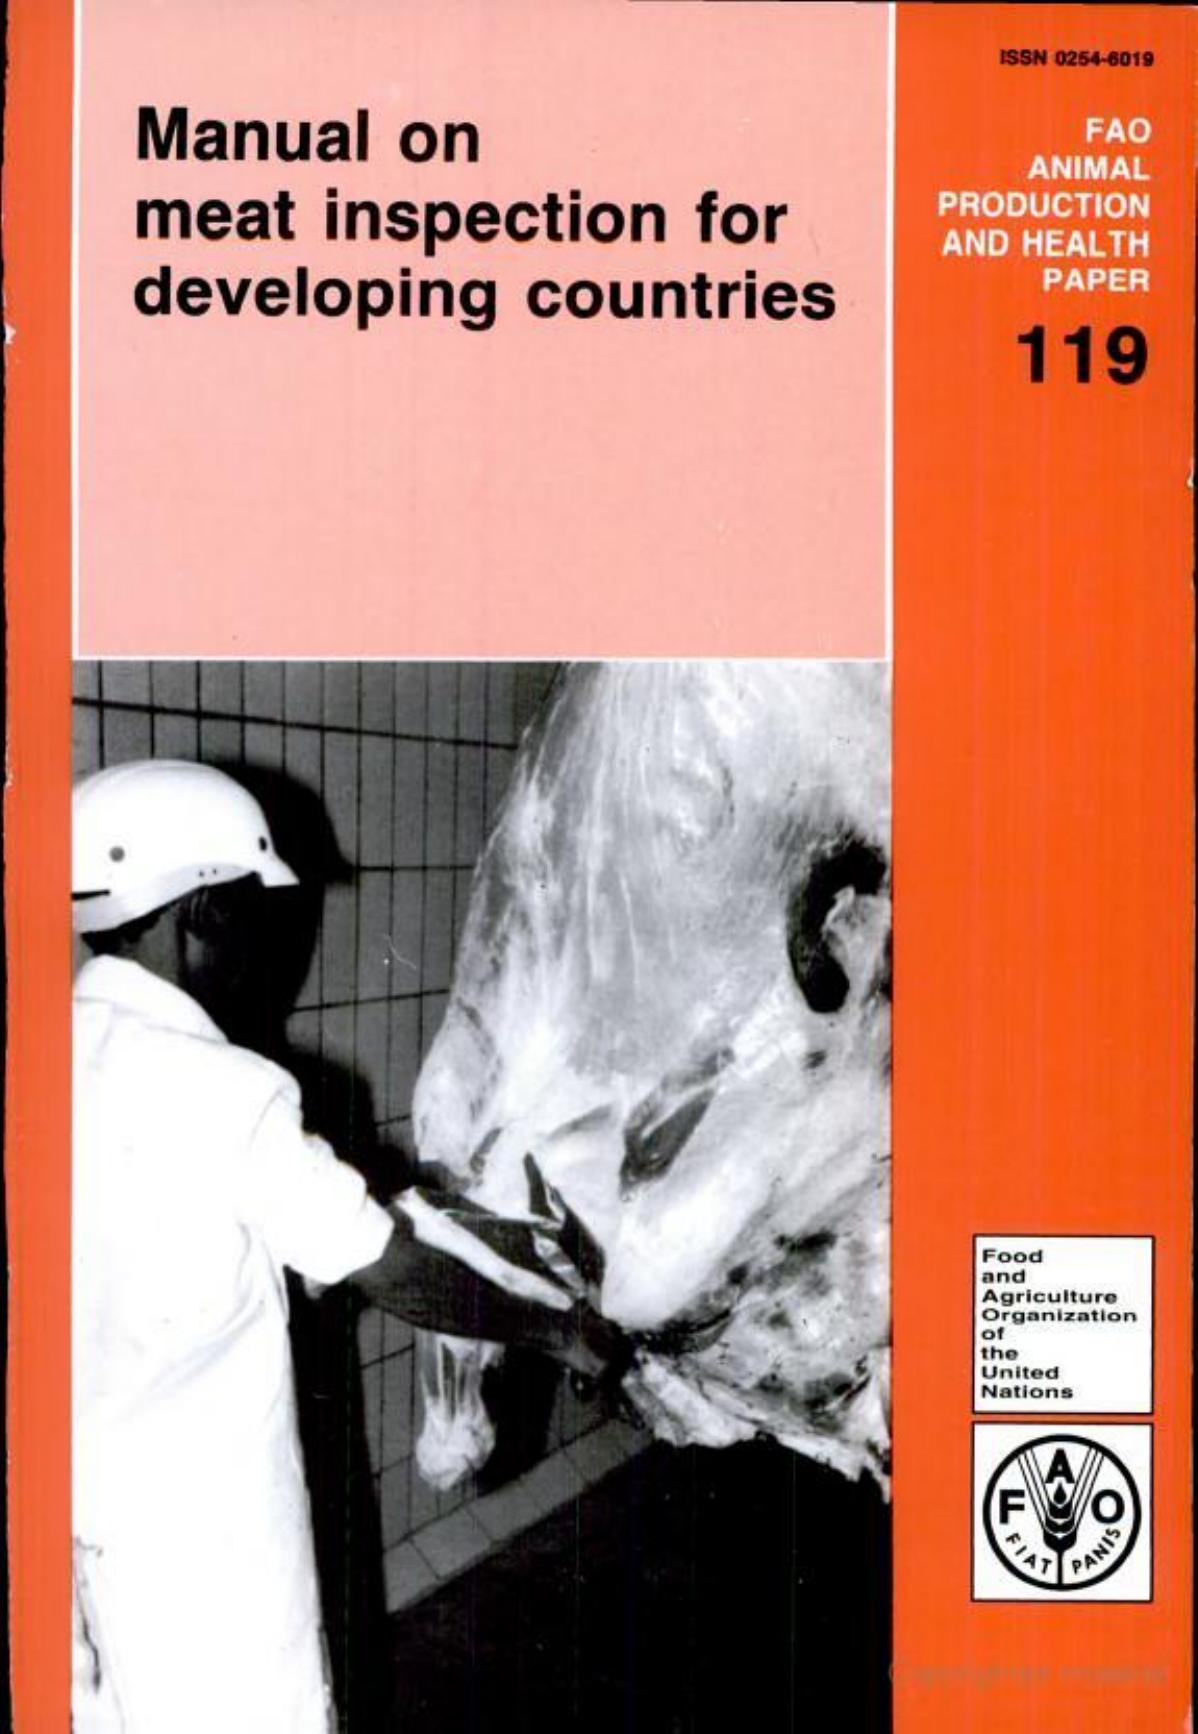 Manual on meat inspection for developing countries